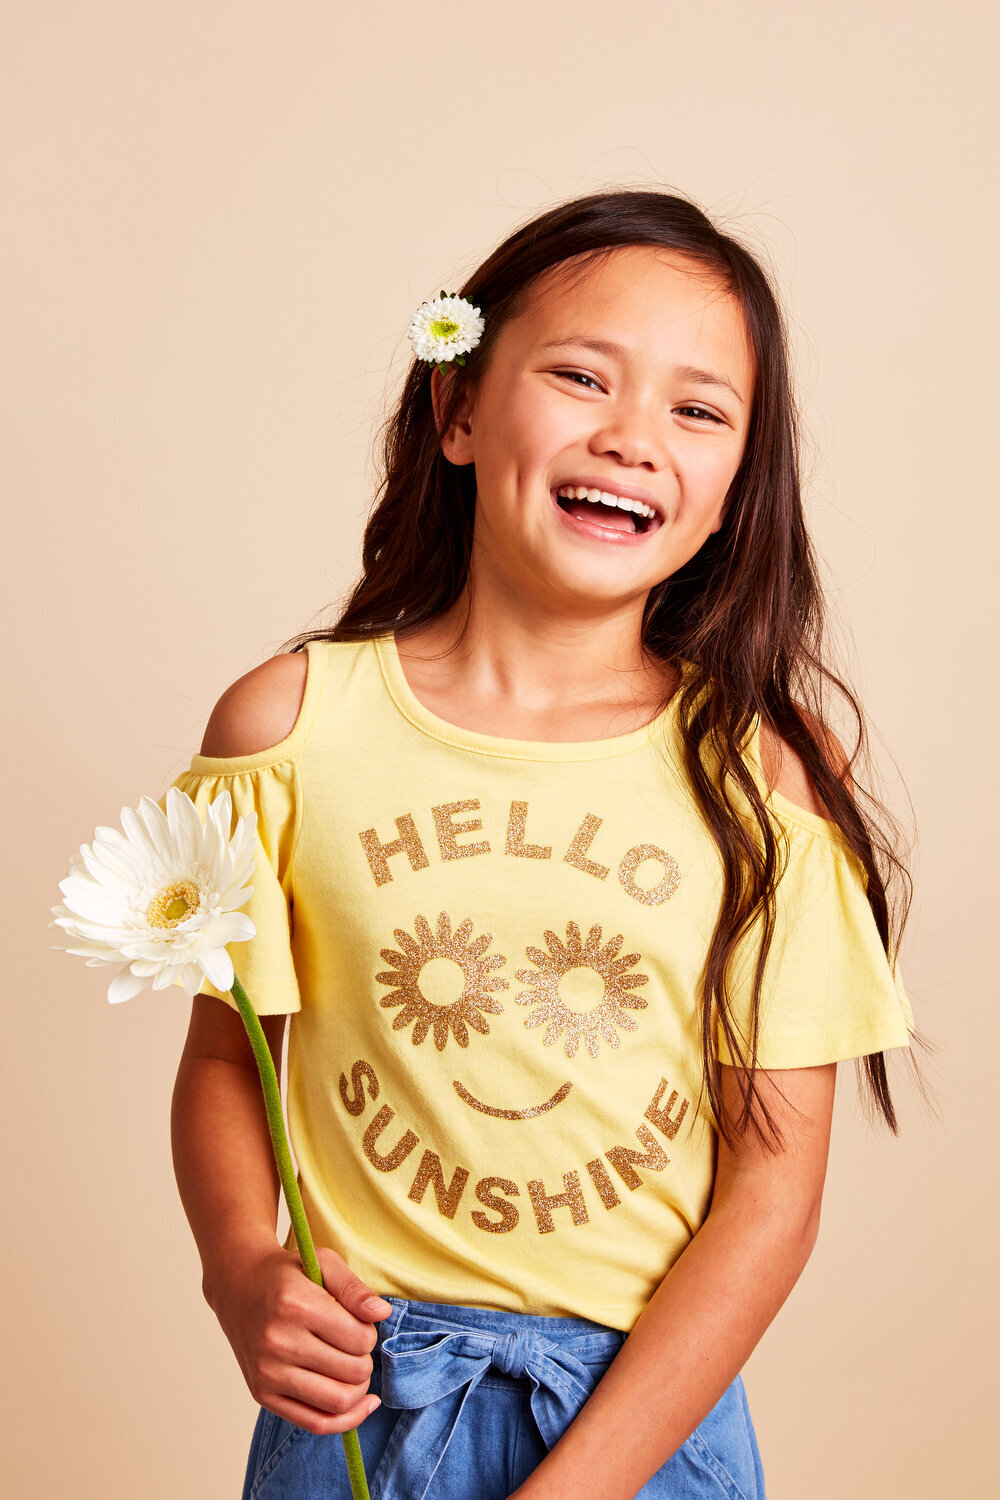 Greer Rivera Photography Kids Editorial Photoshoots Marin CA Girl with flowers in her hair smiling